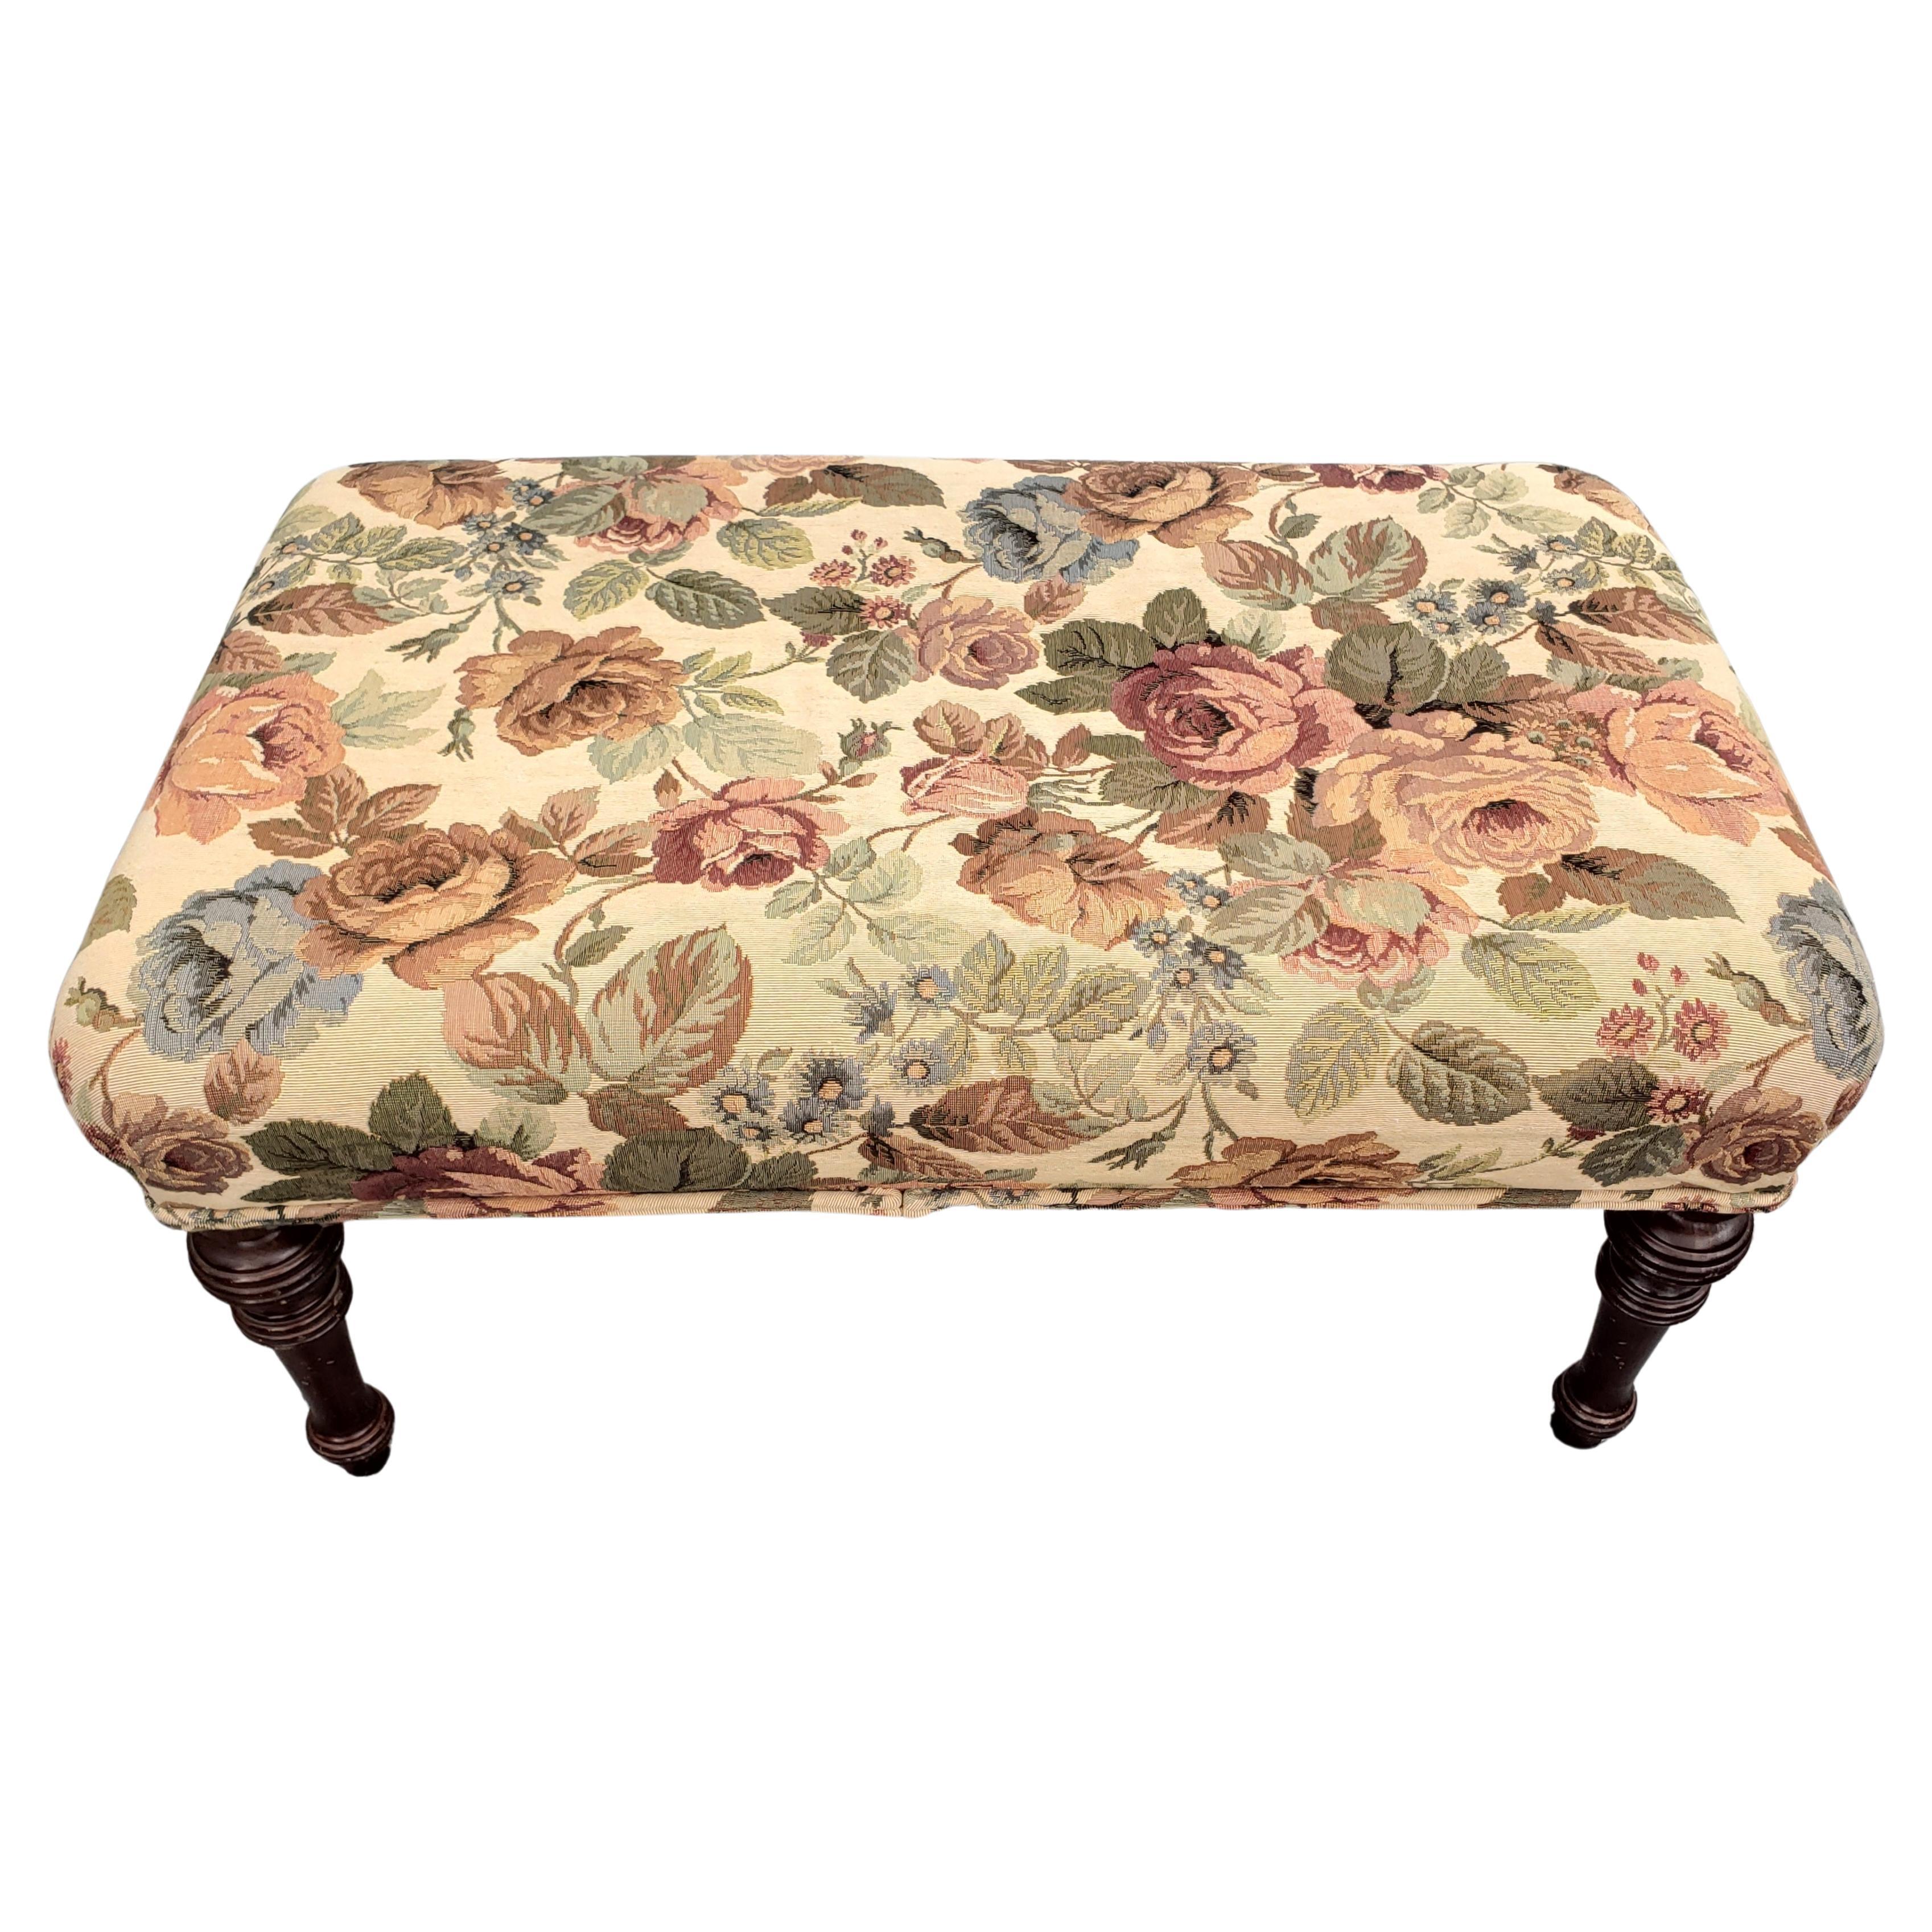 Vintage Mahogany and French floral tapestry bench ottoman stool.
Turned mahogany legs. French tapestry upholstery with flower pattern. 
Good vintage condition
Measures 32